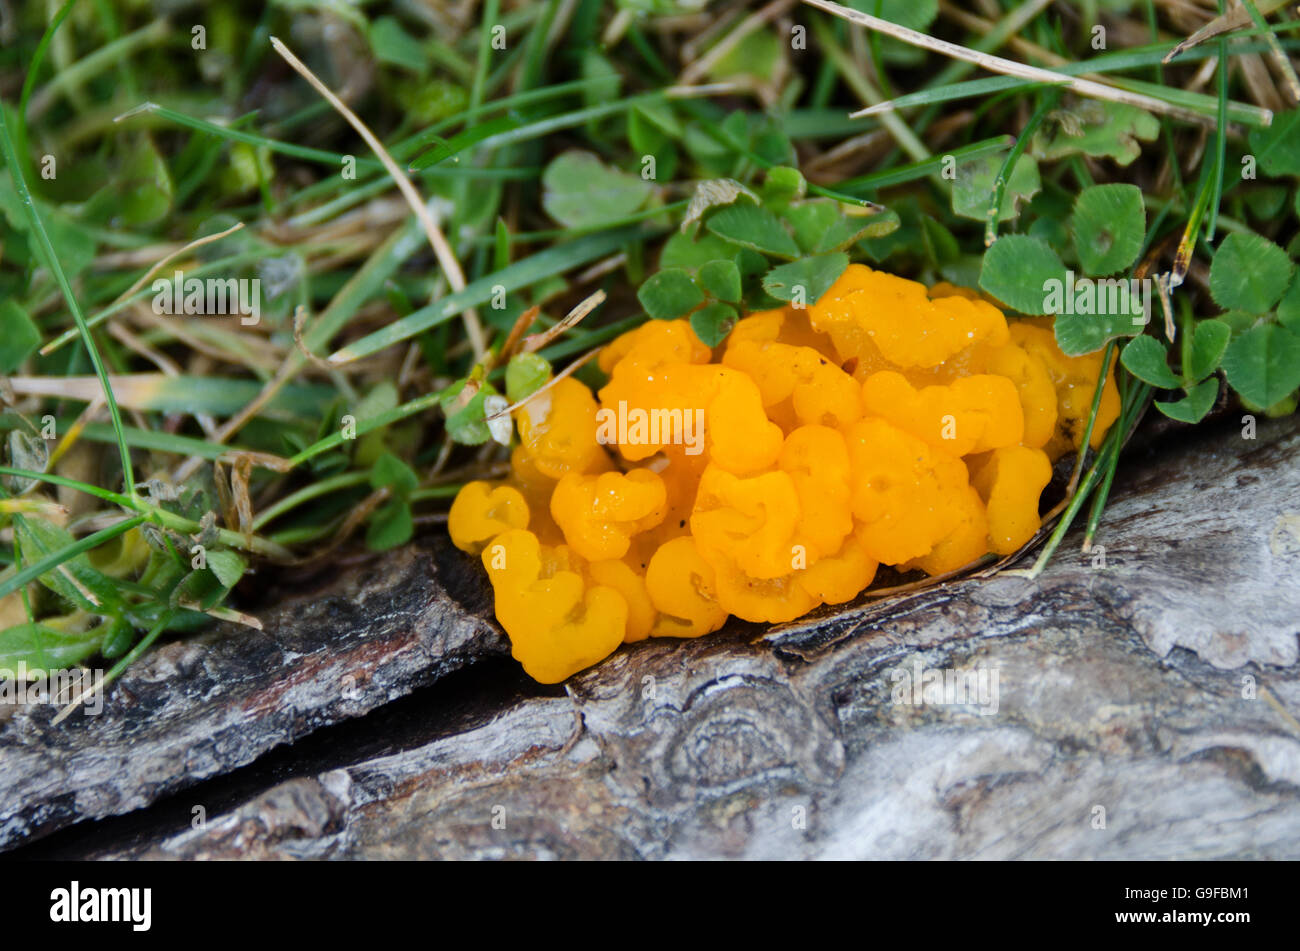 Orange Jelly Fungus (Dacrymyces palmatus) growing on the roots of a Pitch Pine (Pinus rigida) in Seal Harbor, Maine. Stock Photo